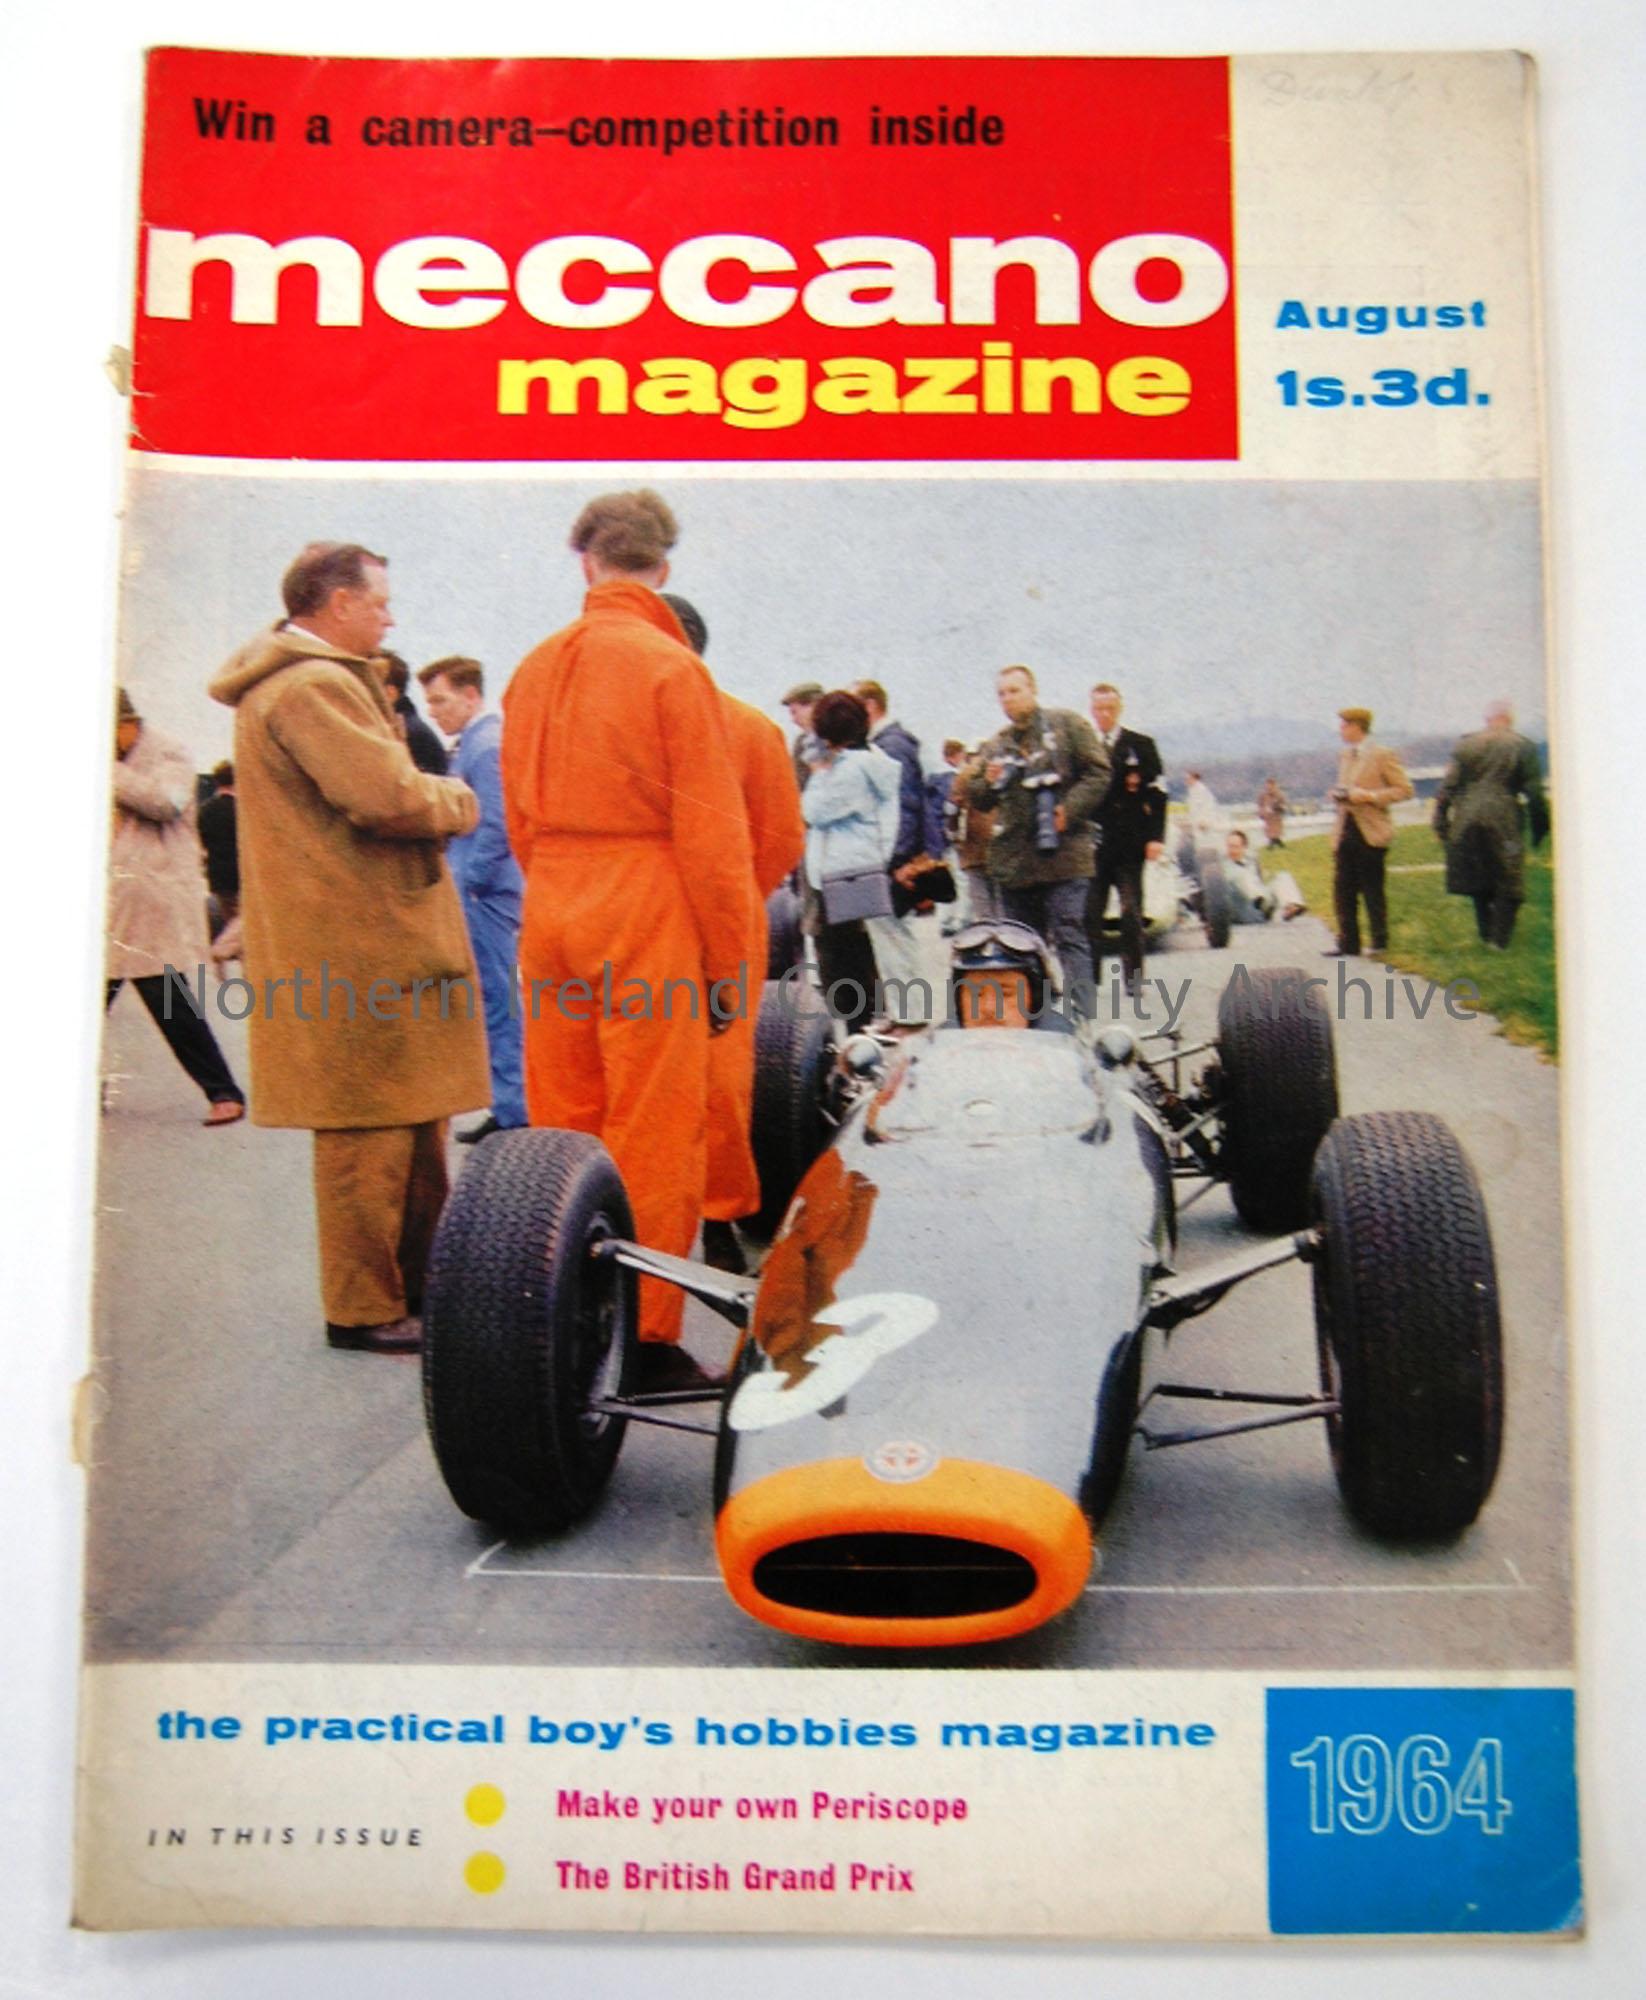 Meccano magazine the practical boy’s hobbies magazine- Win a camera- competition inside. August 1964. Price 1s.3d